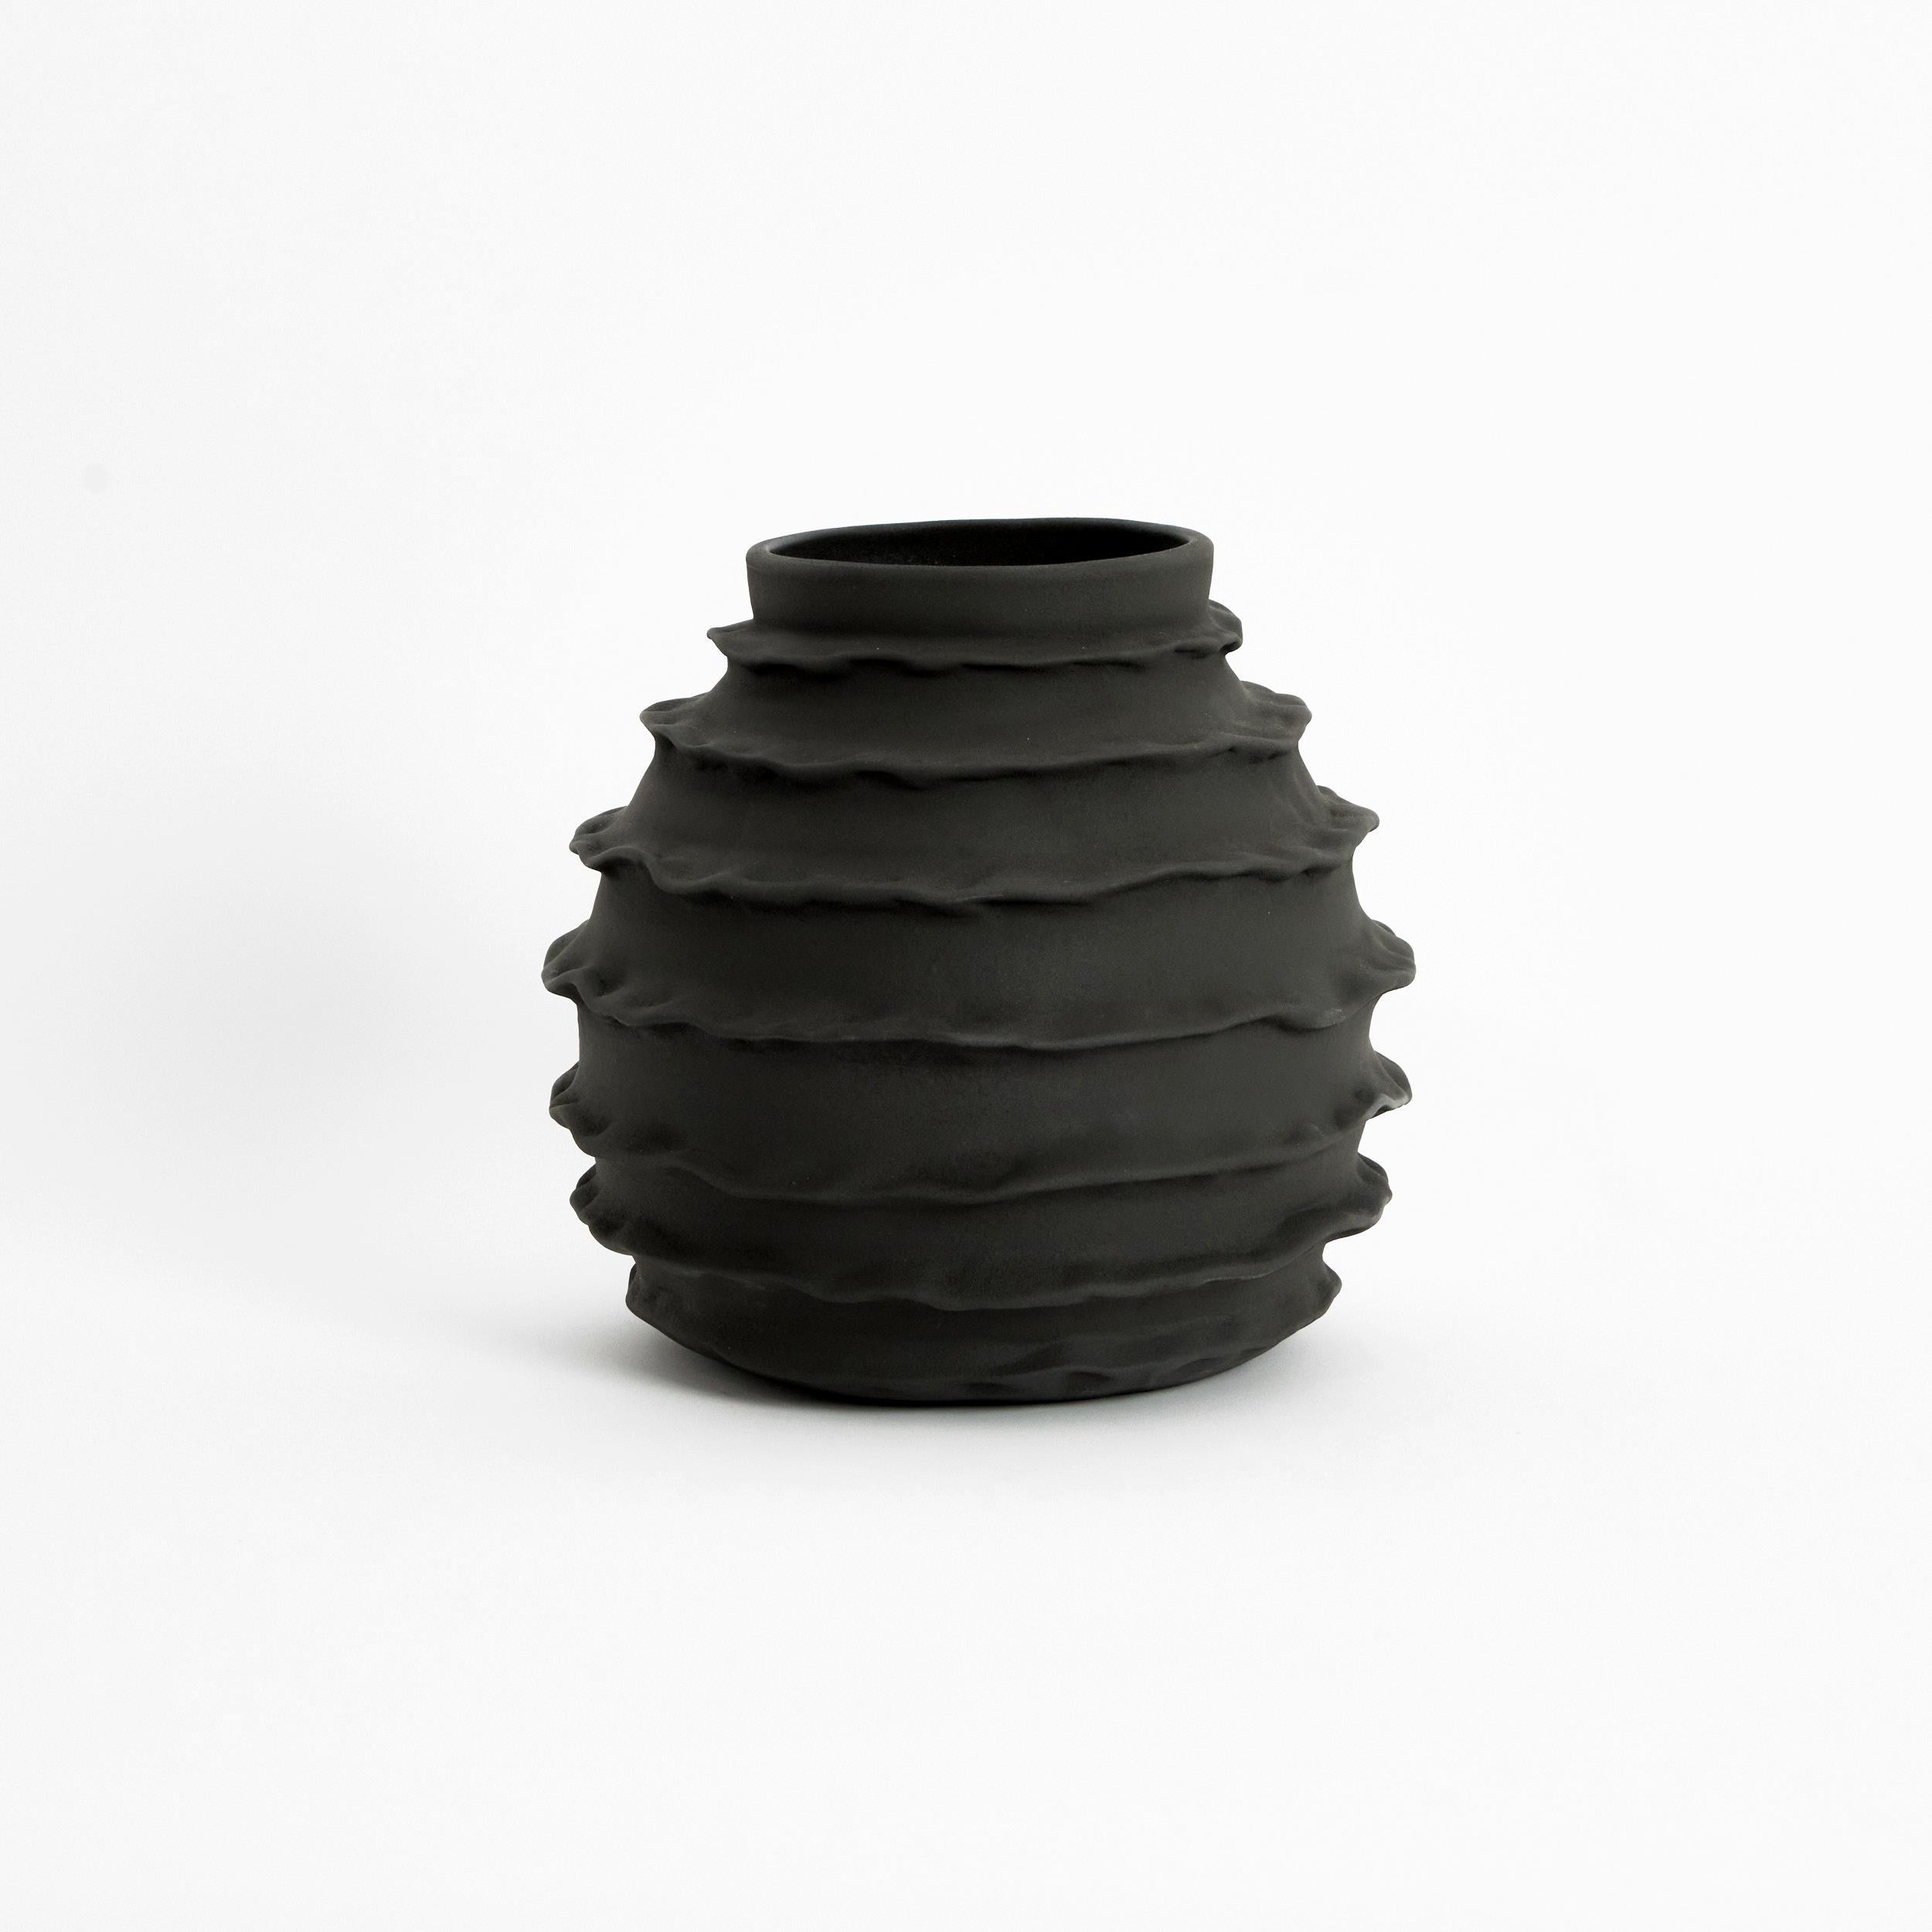 Holiday vase in dusty black.

Designed by Project 213A in 2021 Handmade Stoneware.

The oval vase, ruffled on the edges brings about contrast of lightness. This hand made and embellished vase is finished with a contemporary shiny white glaze